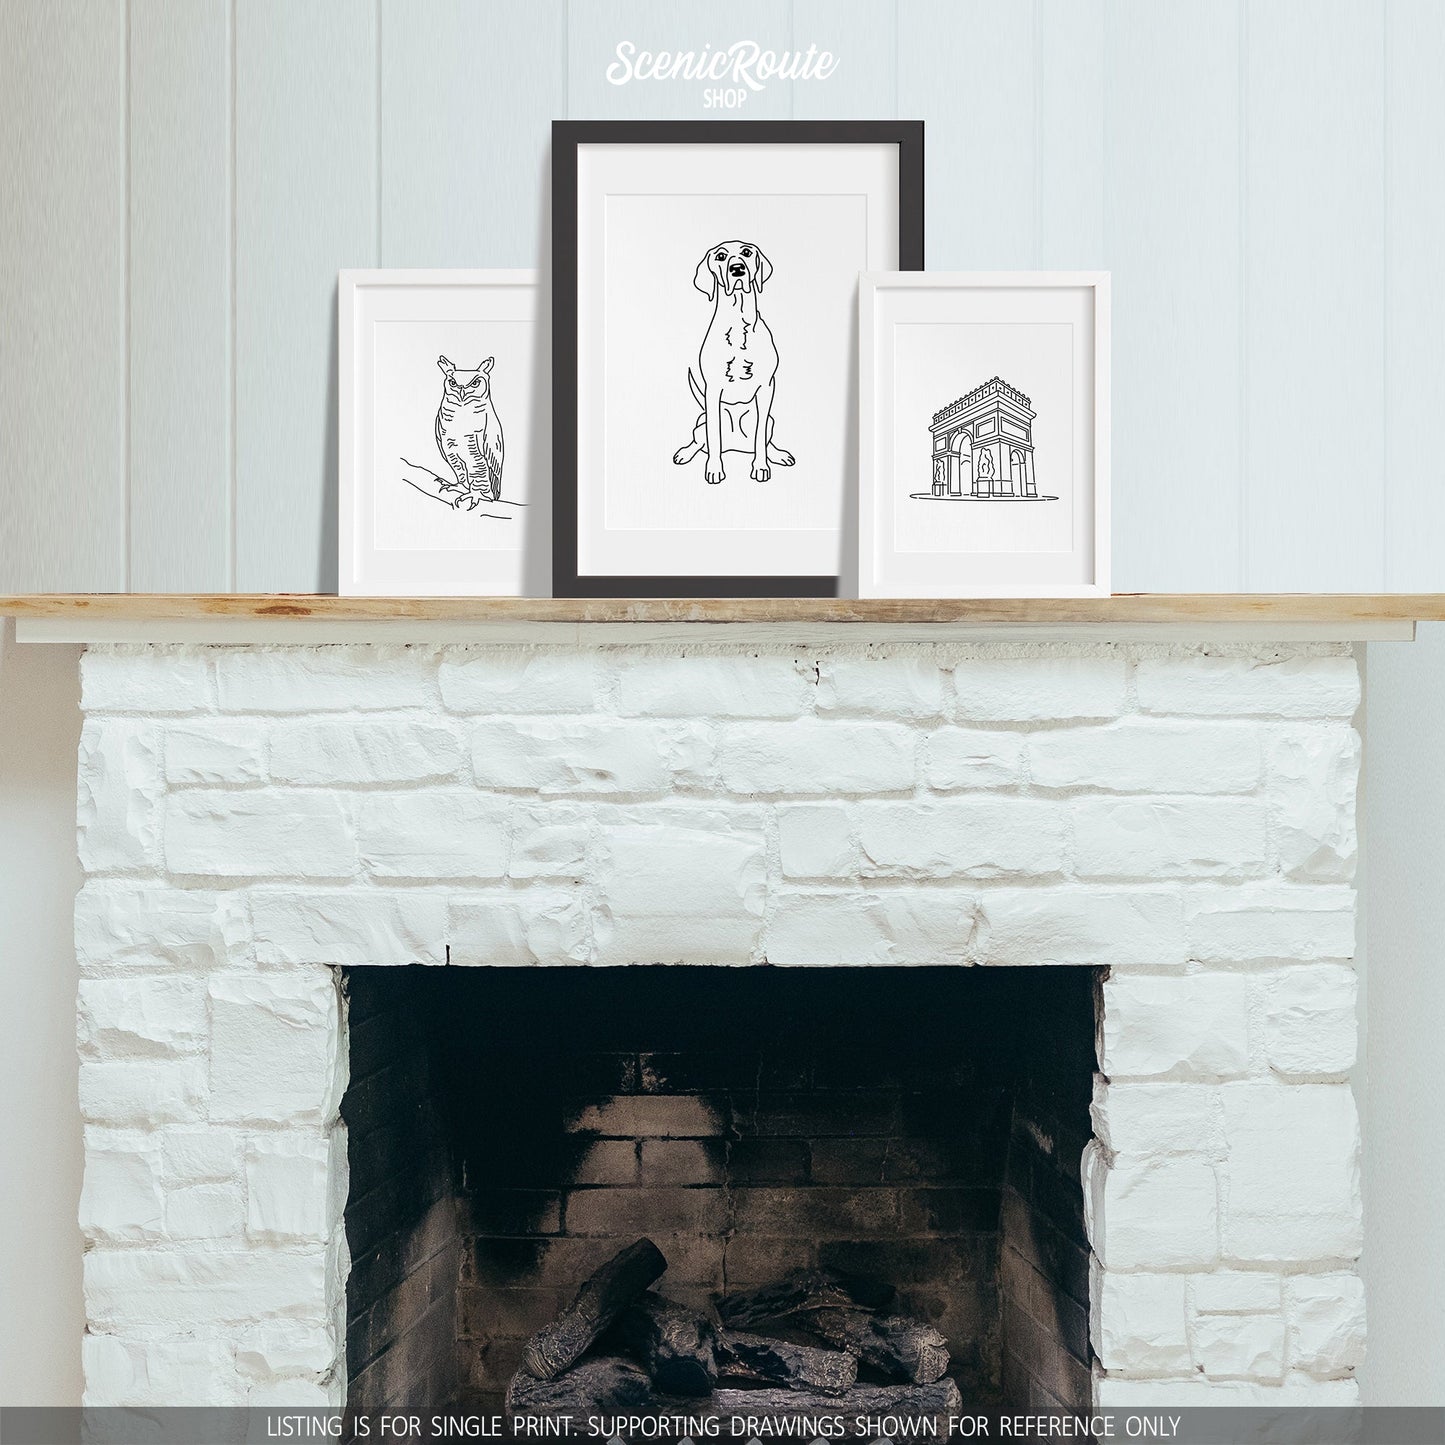 A group of three framed drawings on a fireplace mantle. The line art drawings include an Owl, a Pointer dog, and the Paris Arc de Triomphe